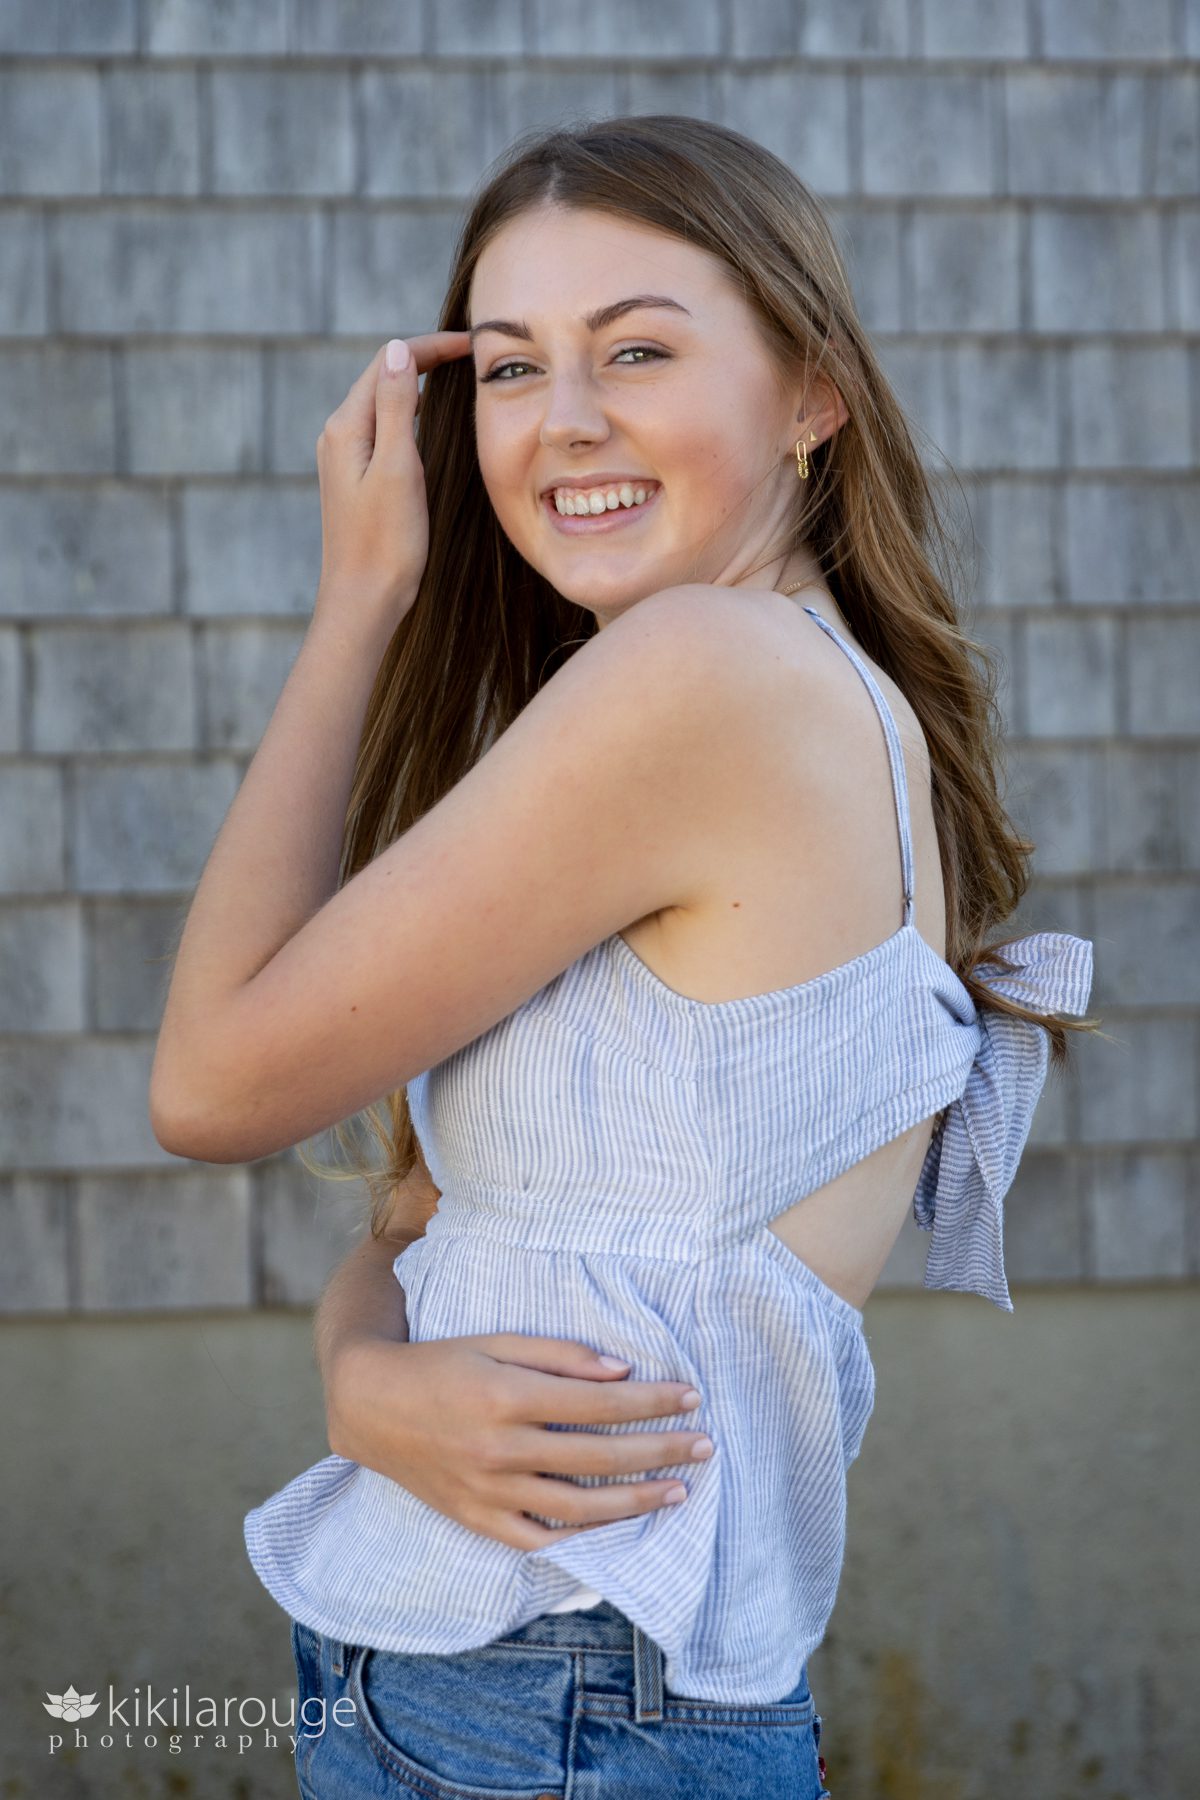 Smiling teen girl with hand in hair and on waist and a bow in back tops